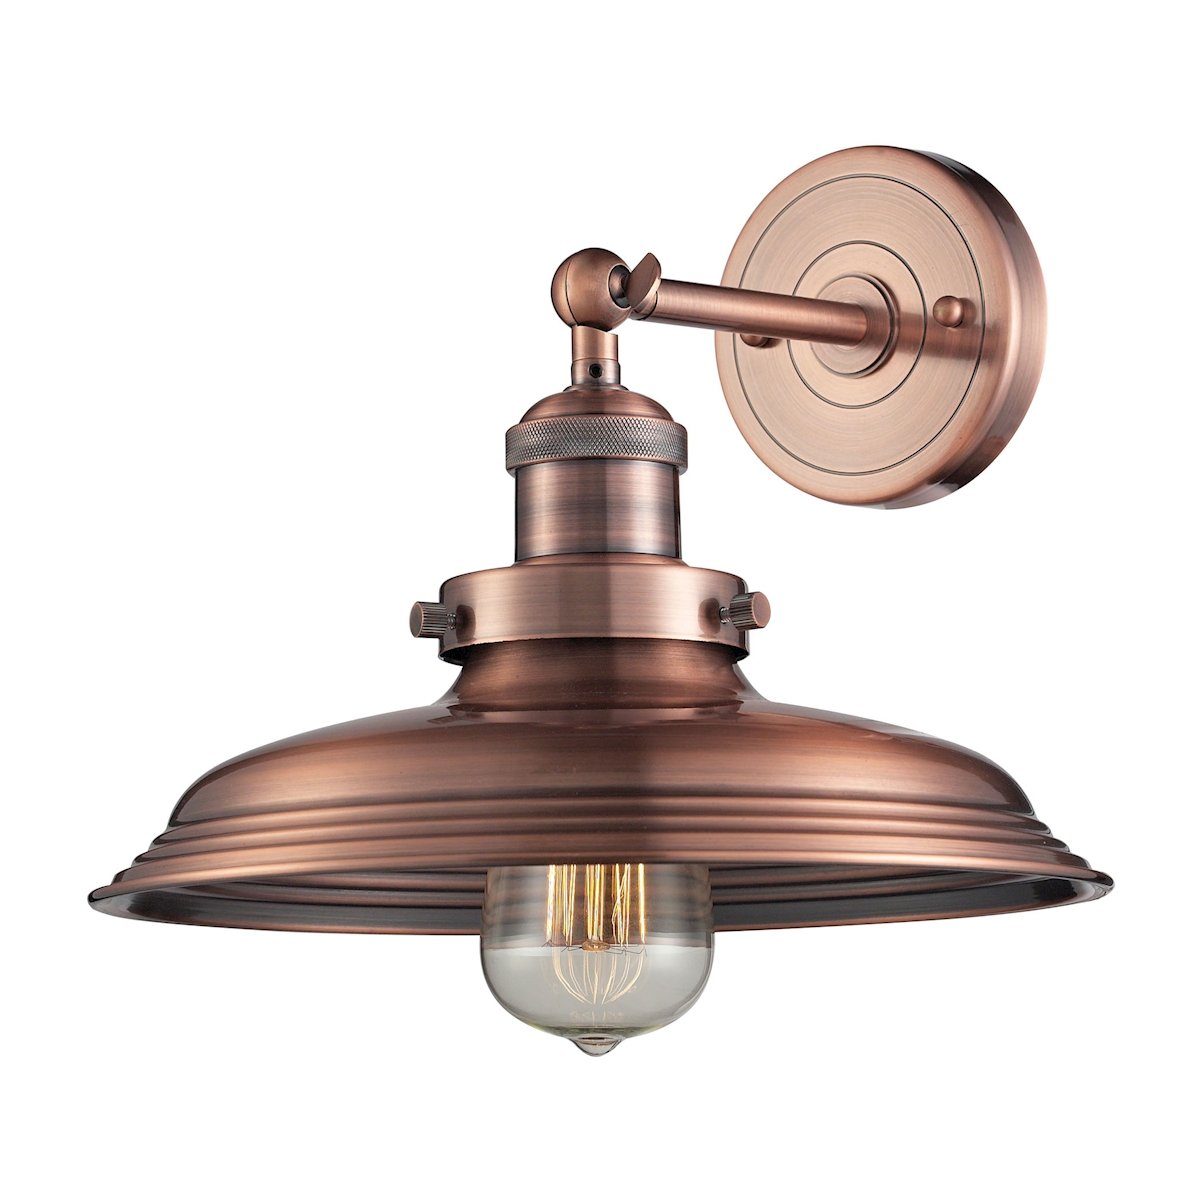 Newberry 1 Light Wall Sconce In Antique Copper Wall Sconce Elk Lighting Default Value 